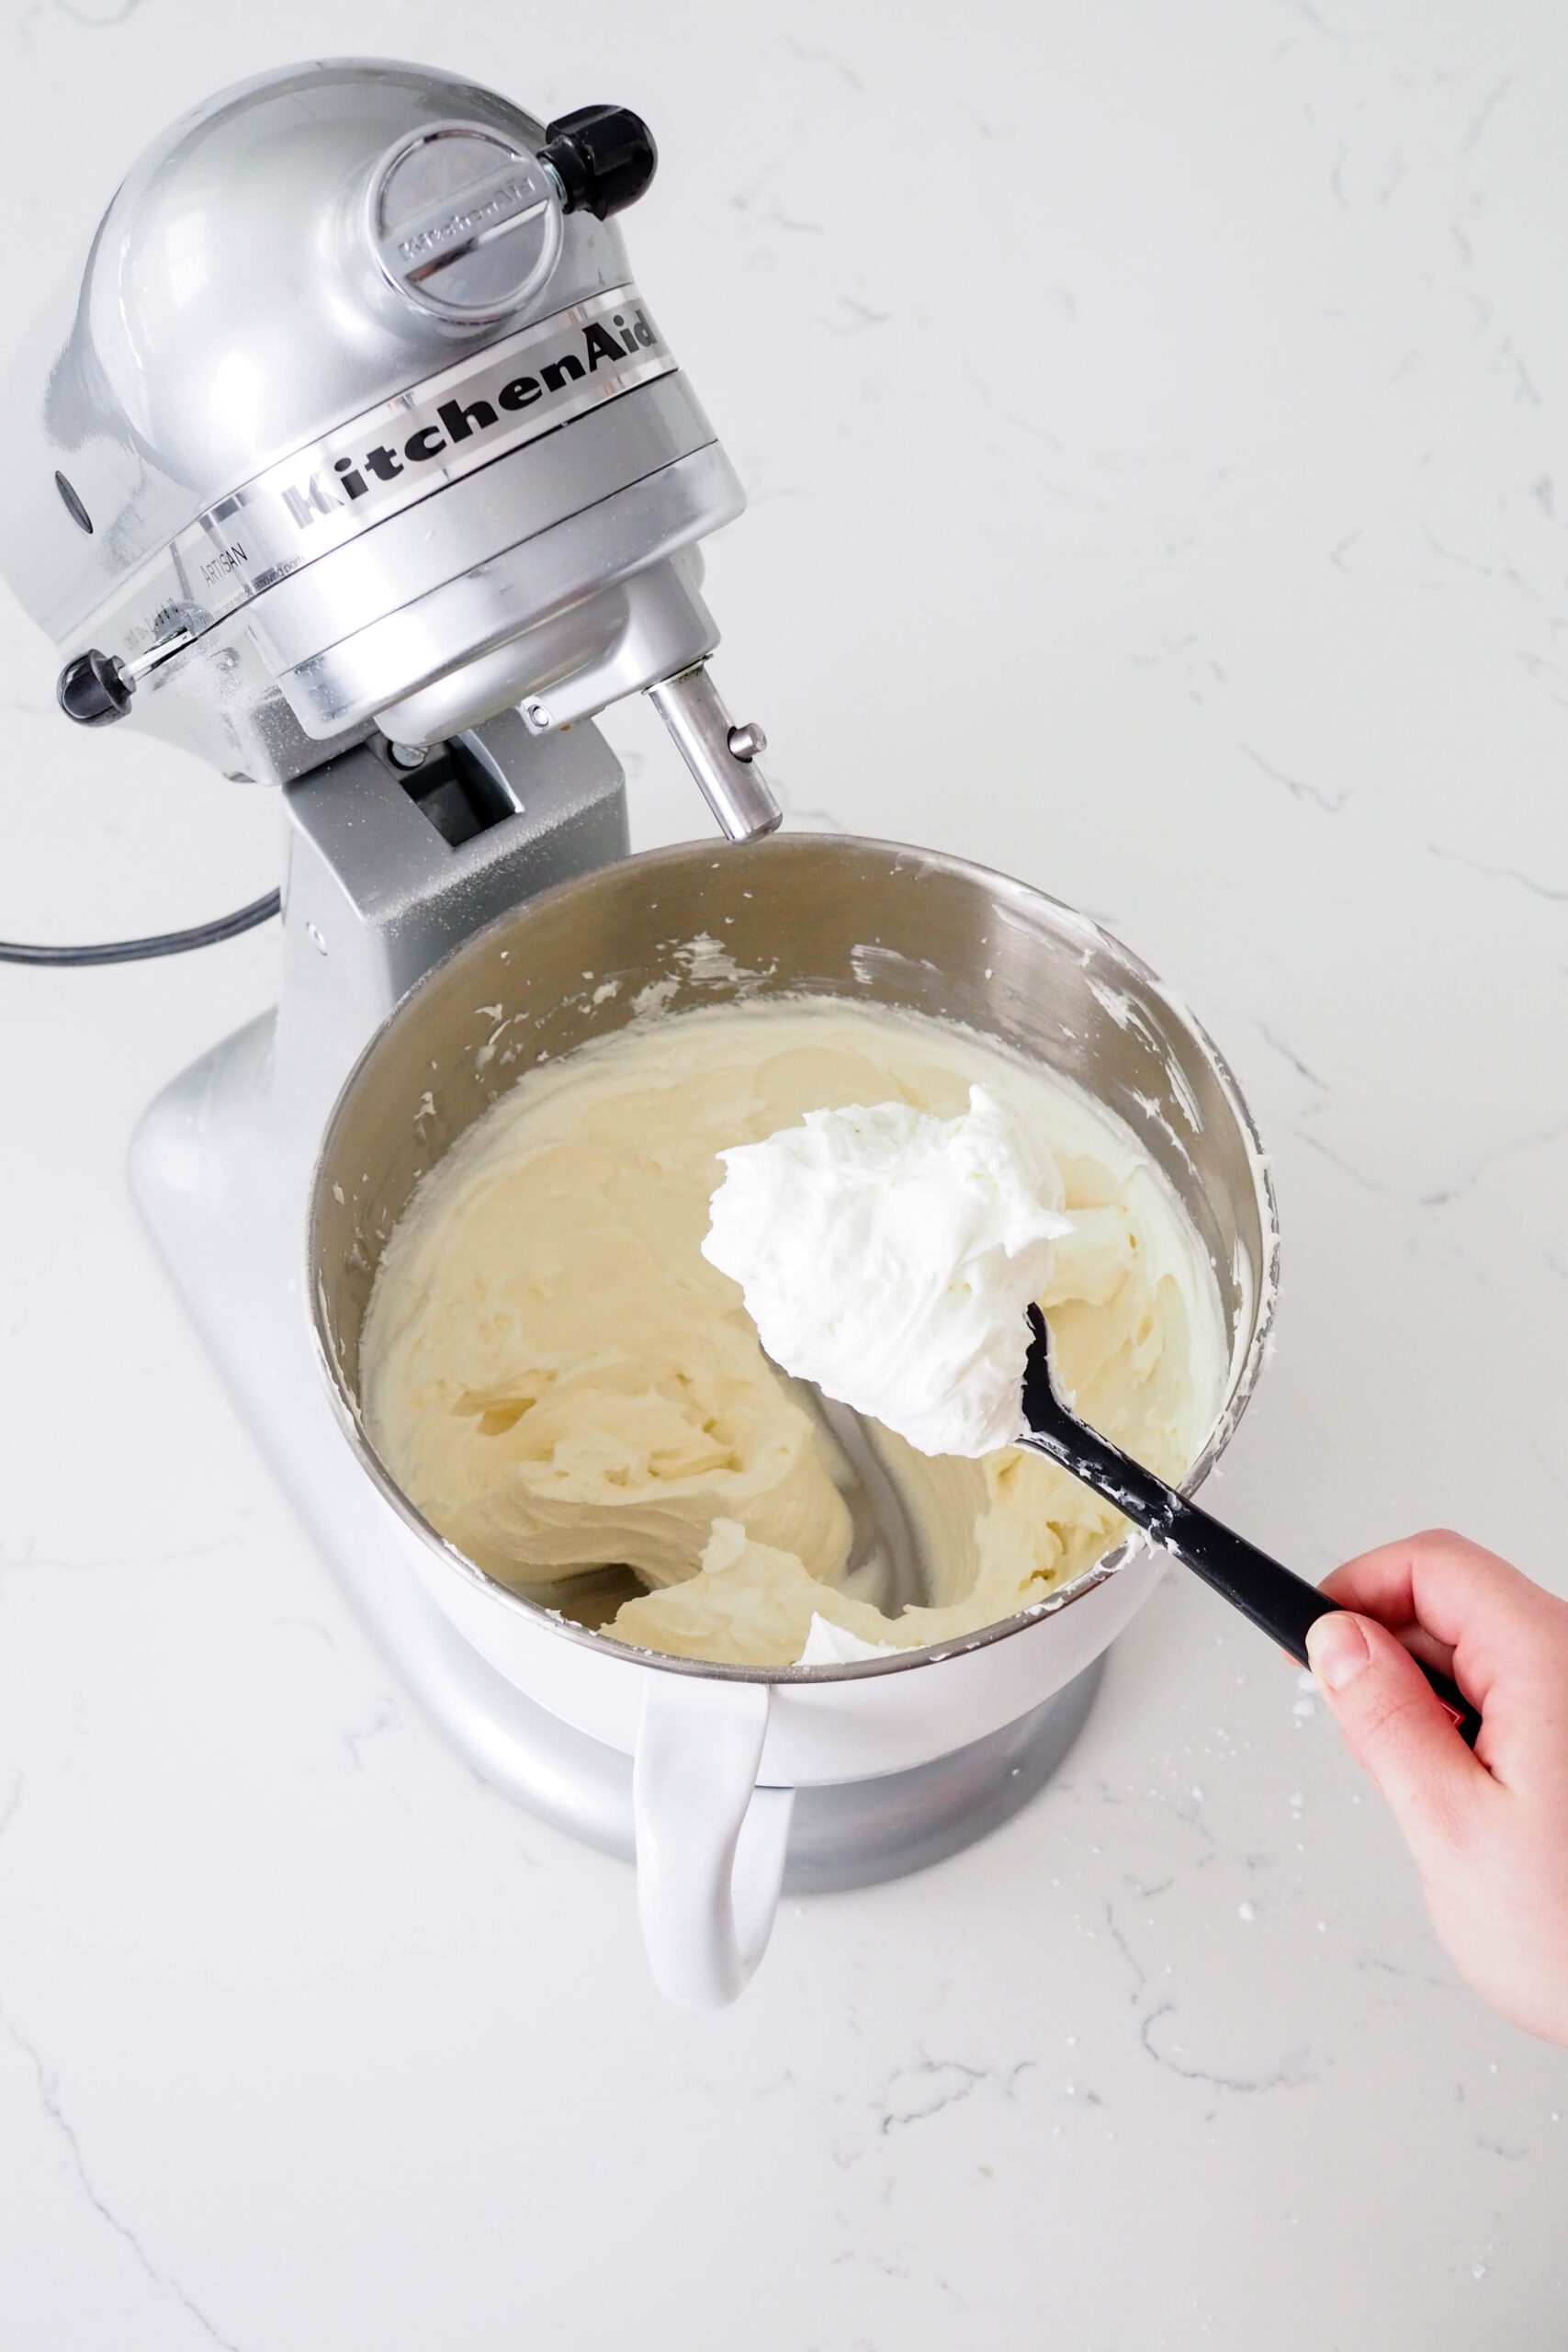 White chocolate buttercream is light and fluffy on a spatula.